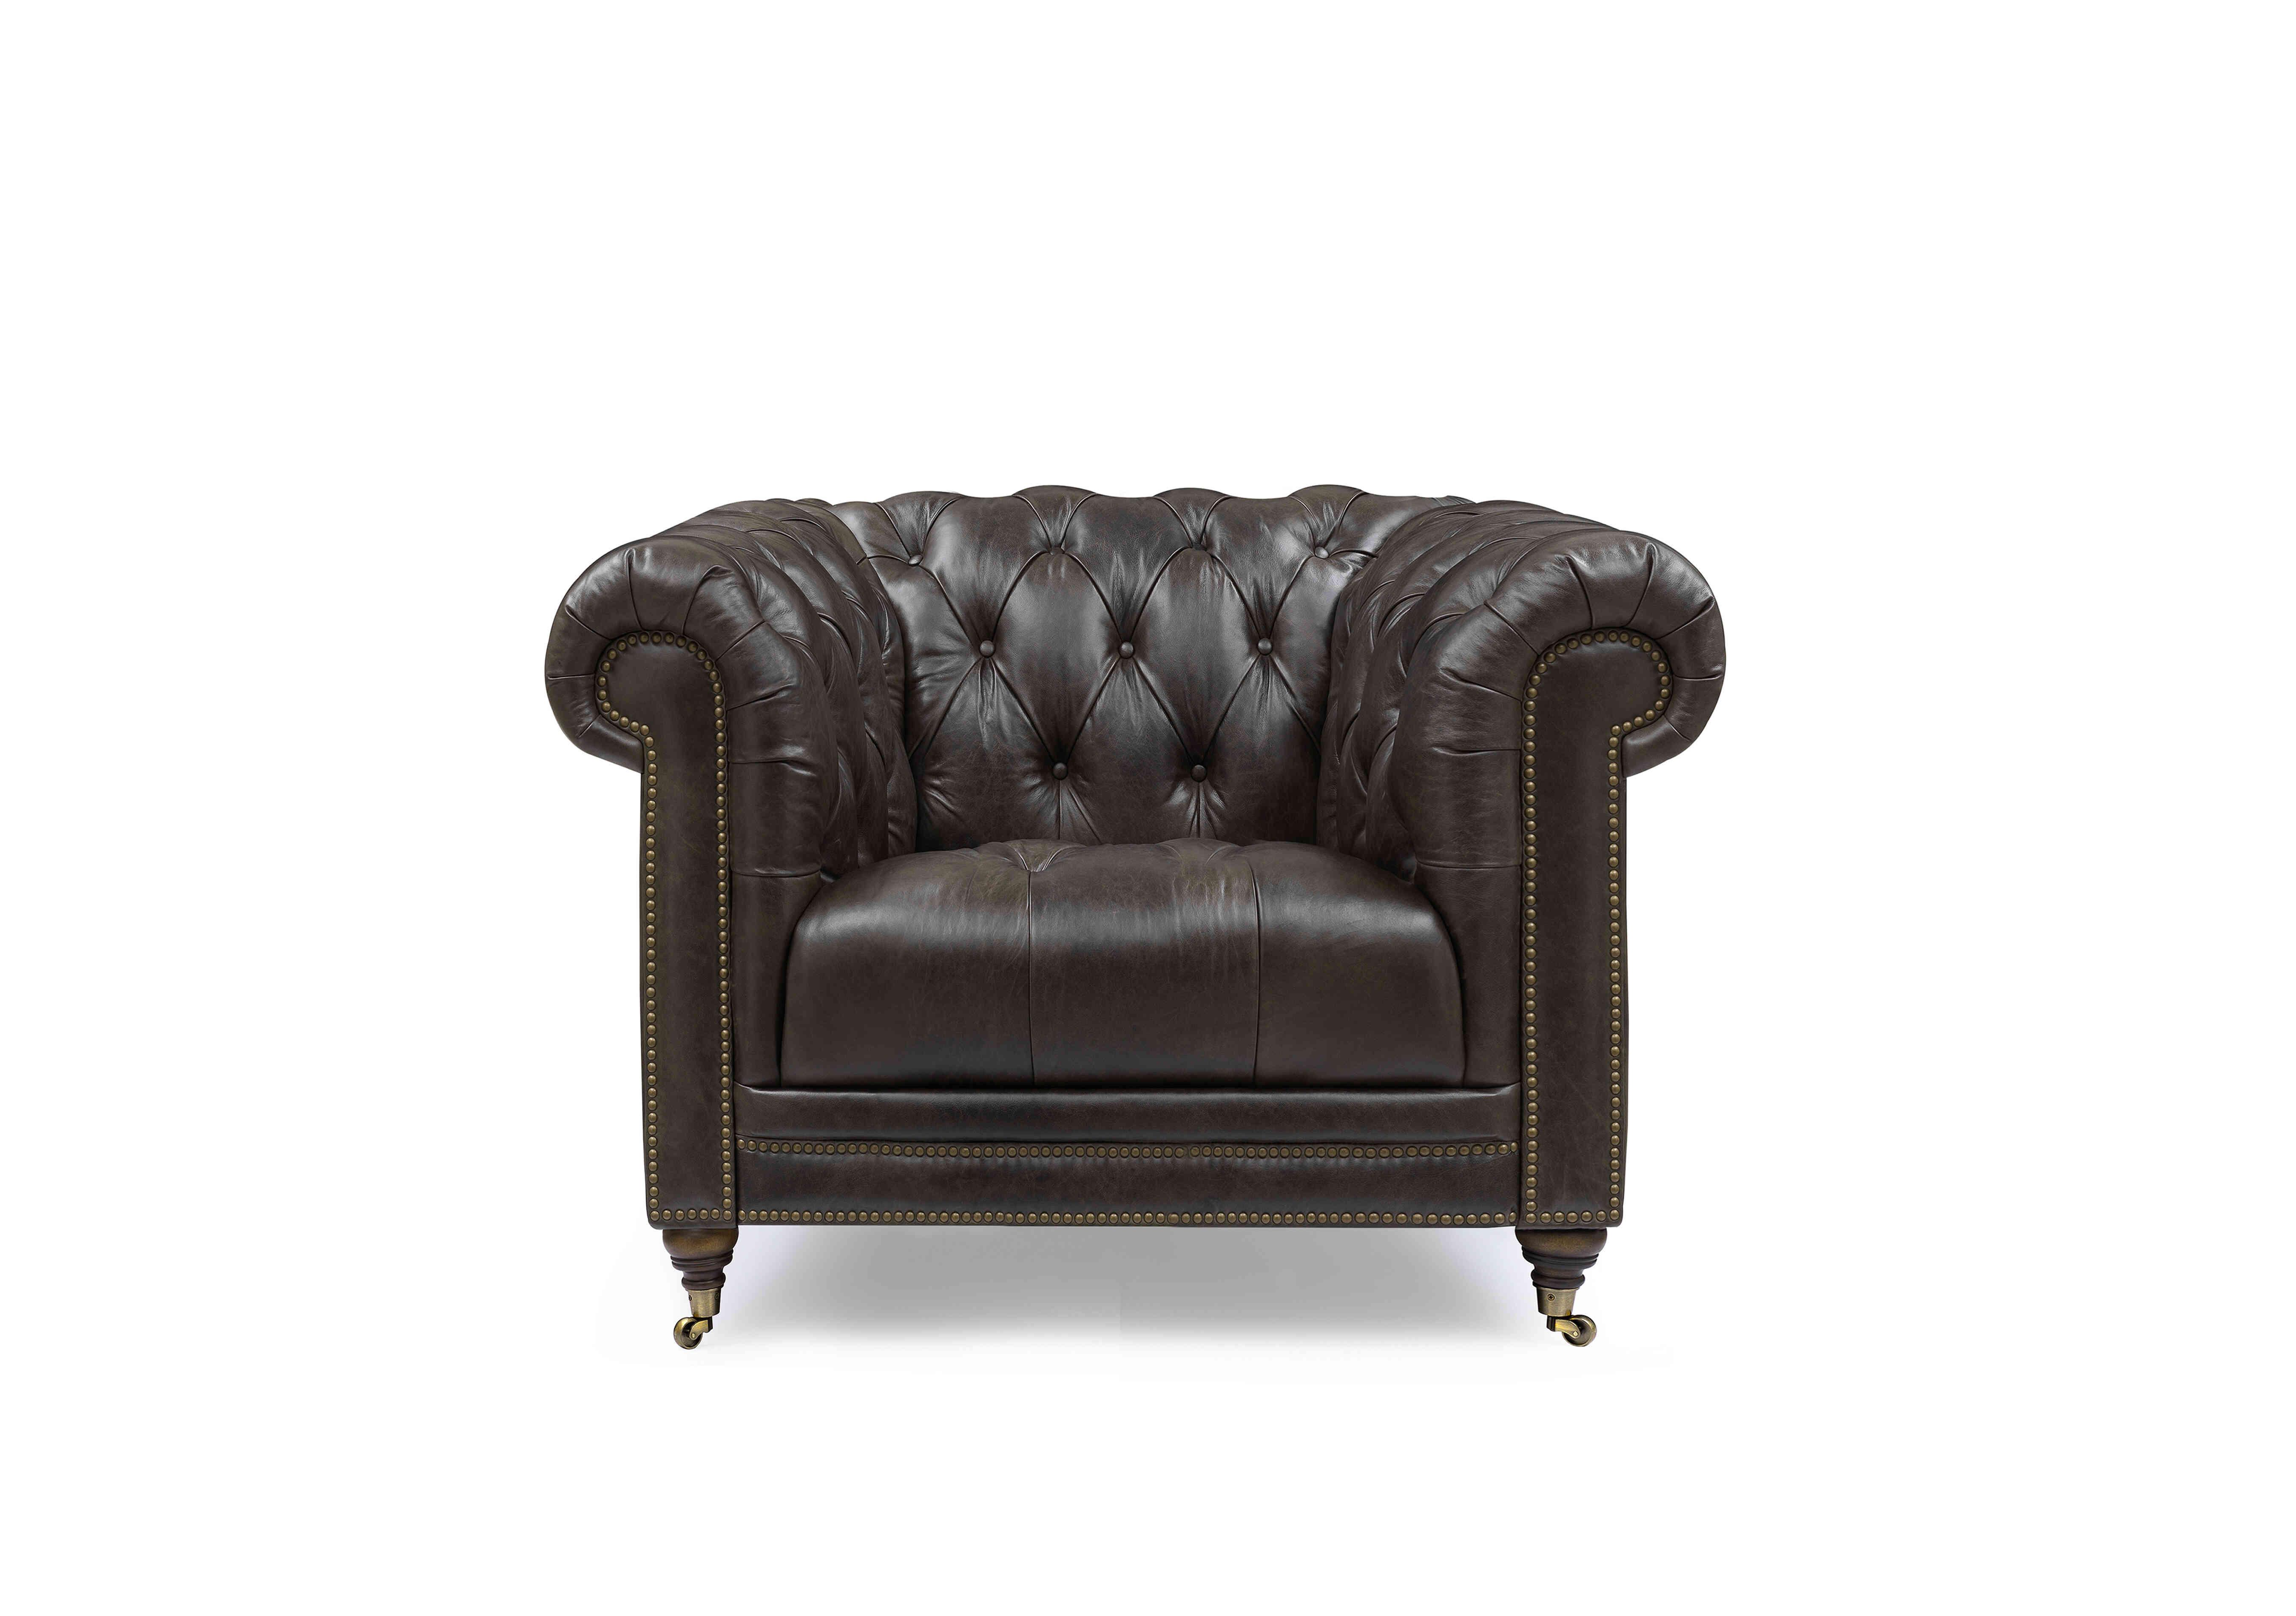 Walter Leather Chesterfield Chair with USB-C in X3y1-1759ls Cannon on Furniture Village